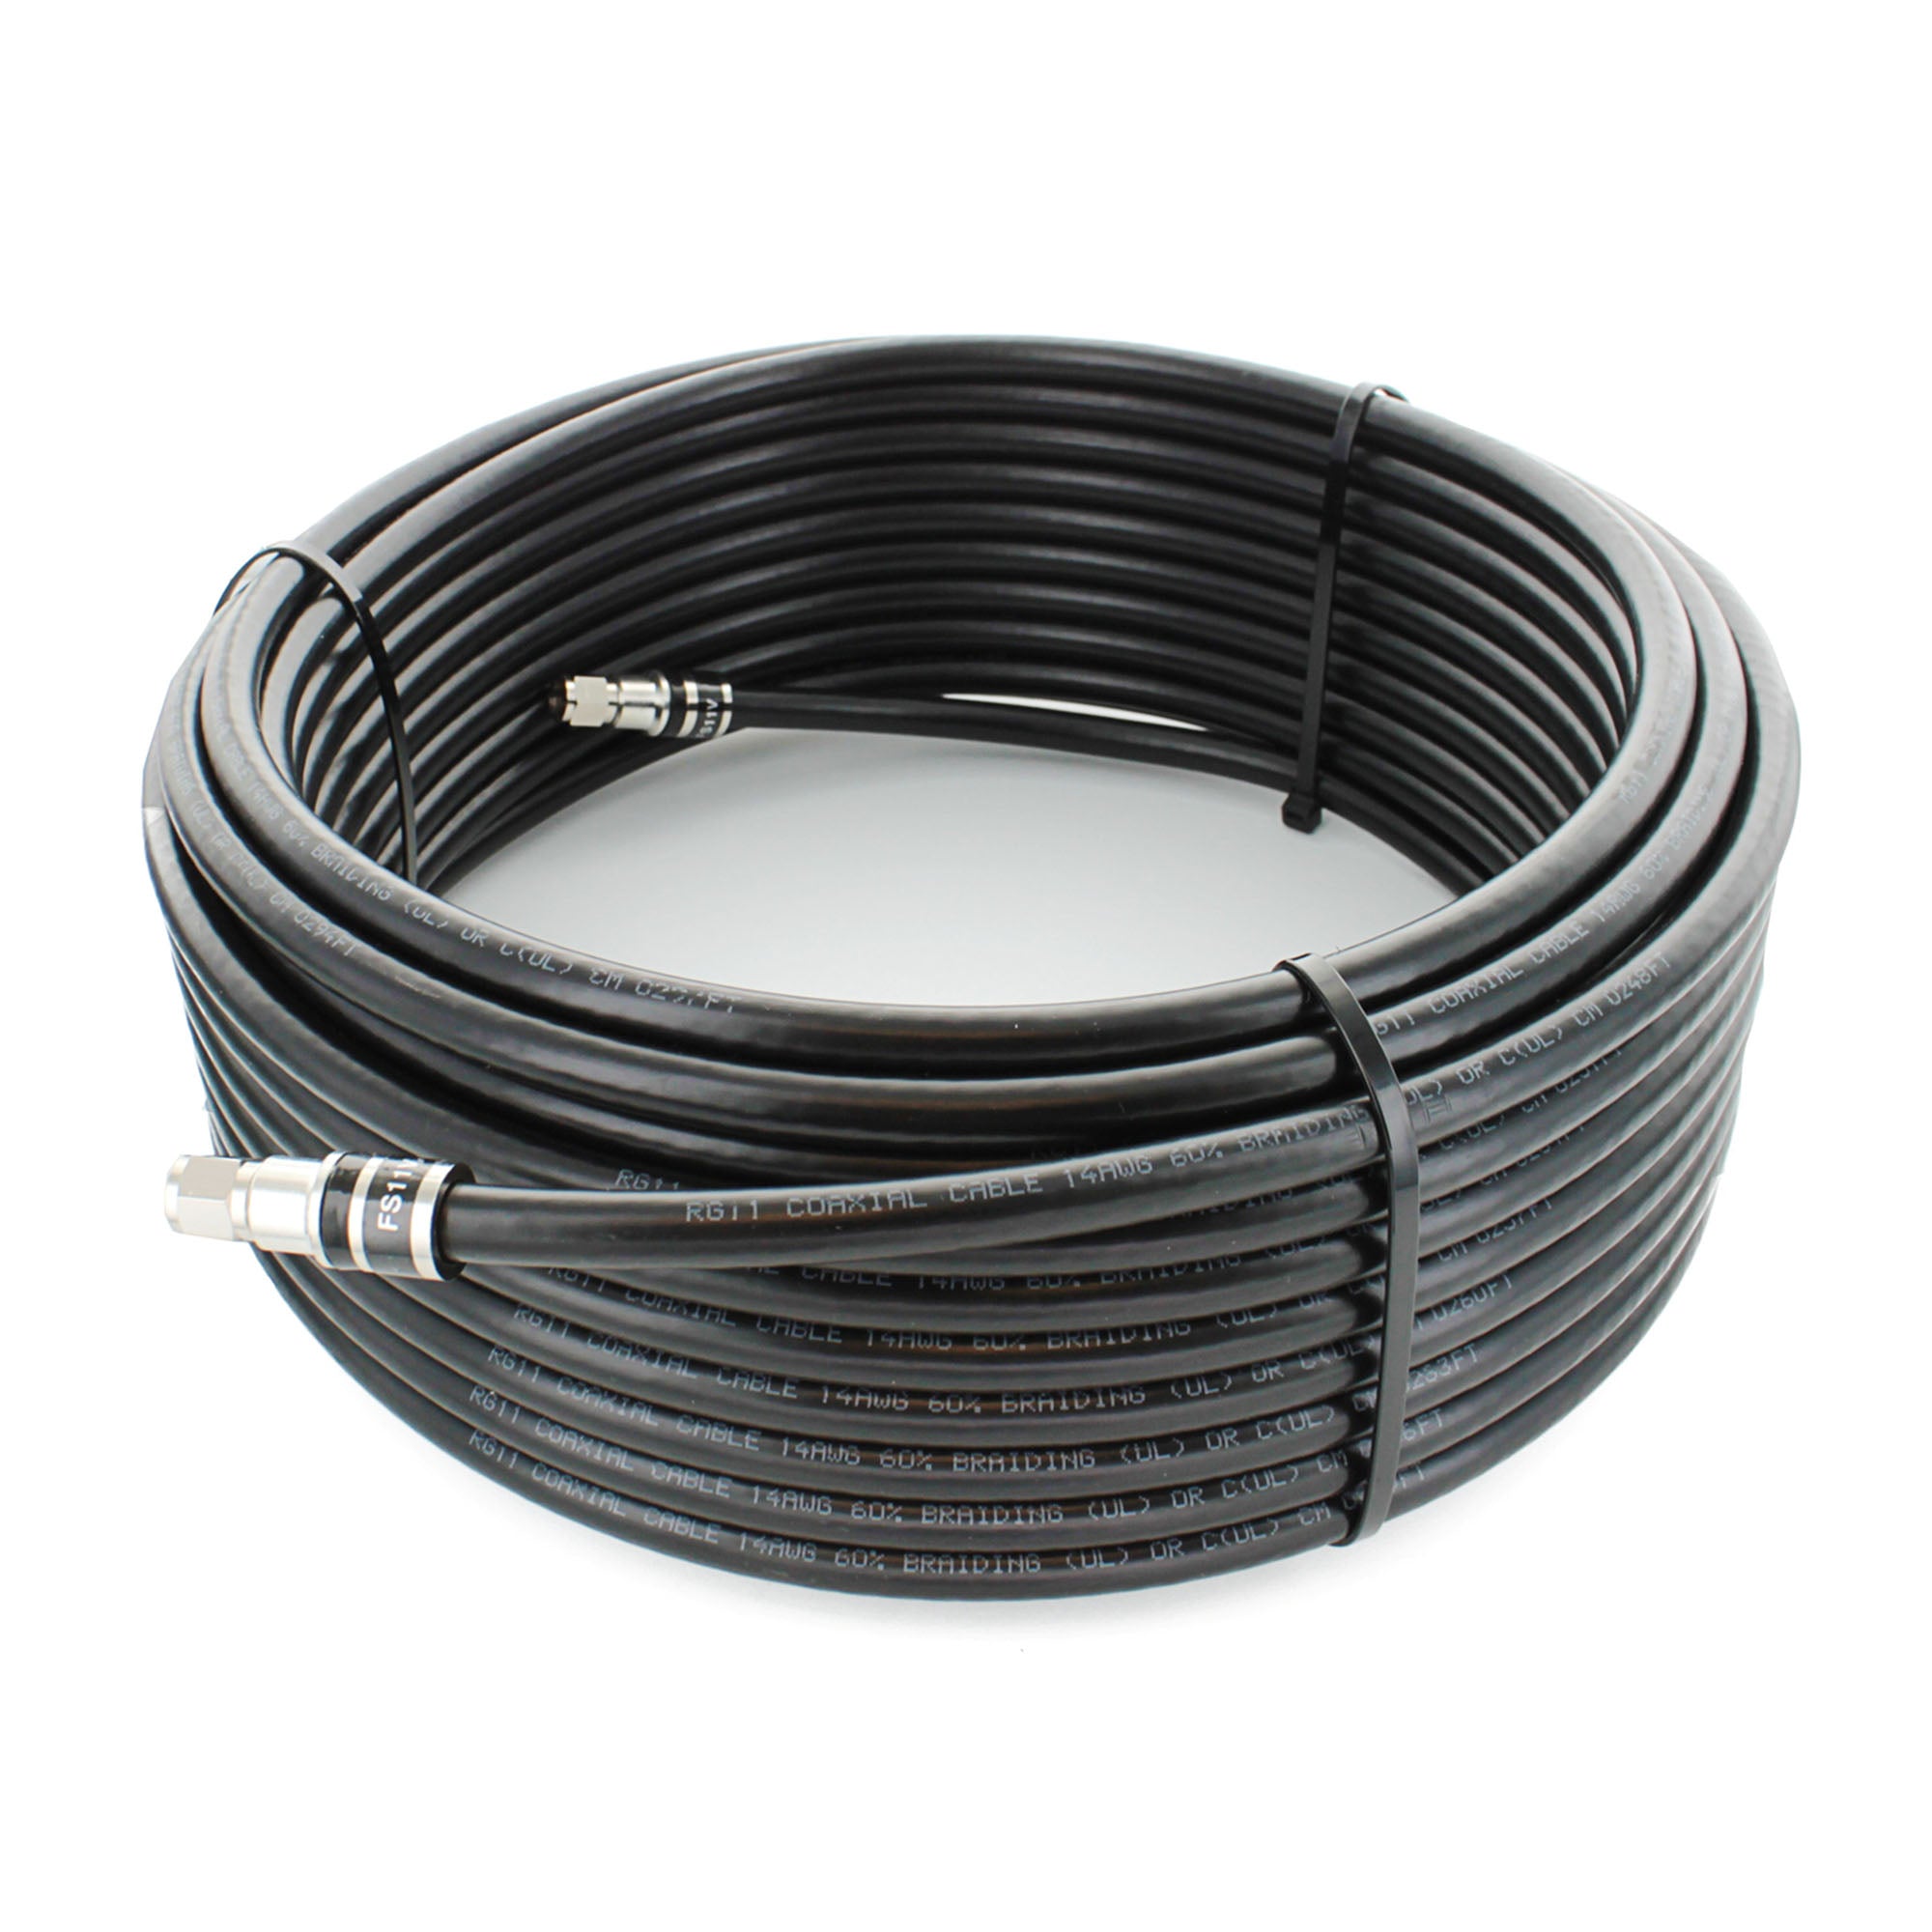 Wilson cable 75 ft. RG11 with F -male Connectors - 670WI951175